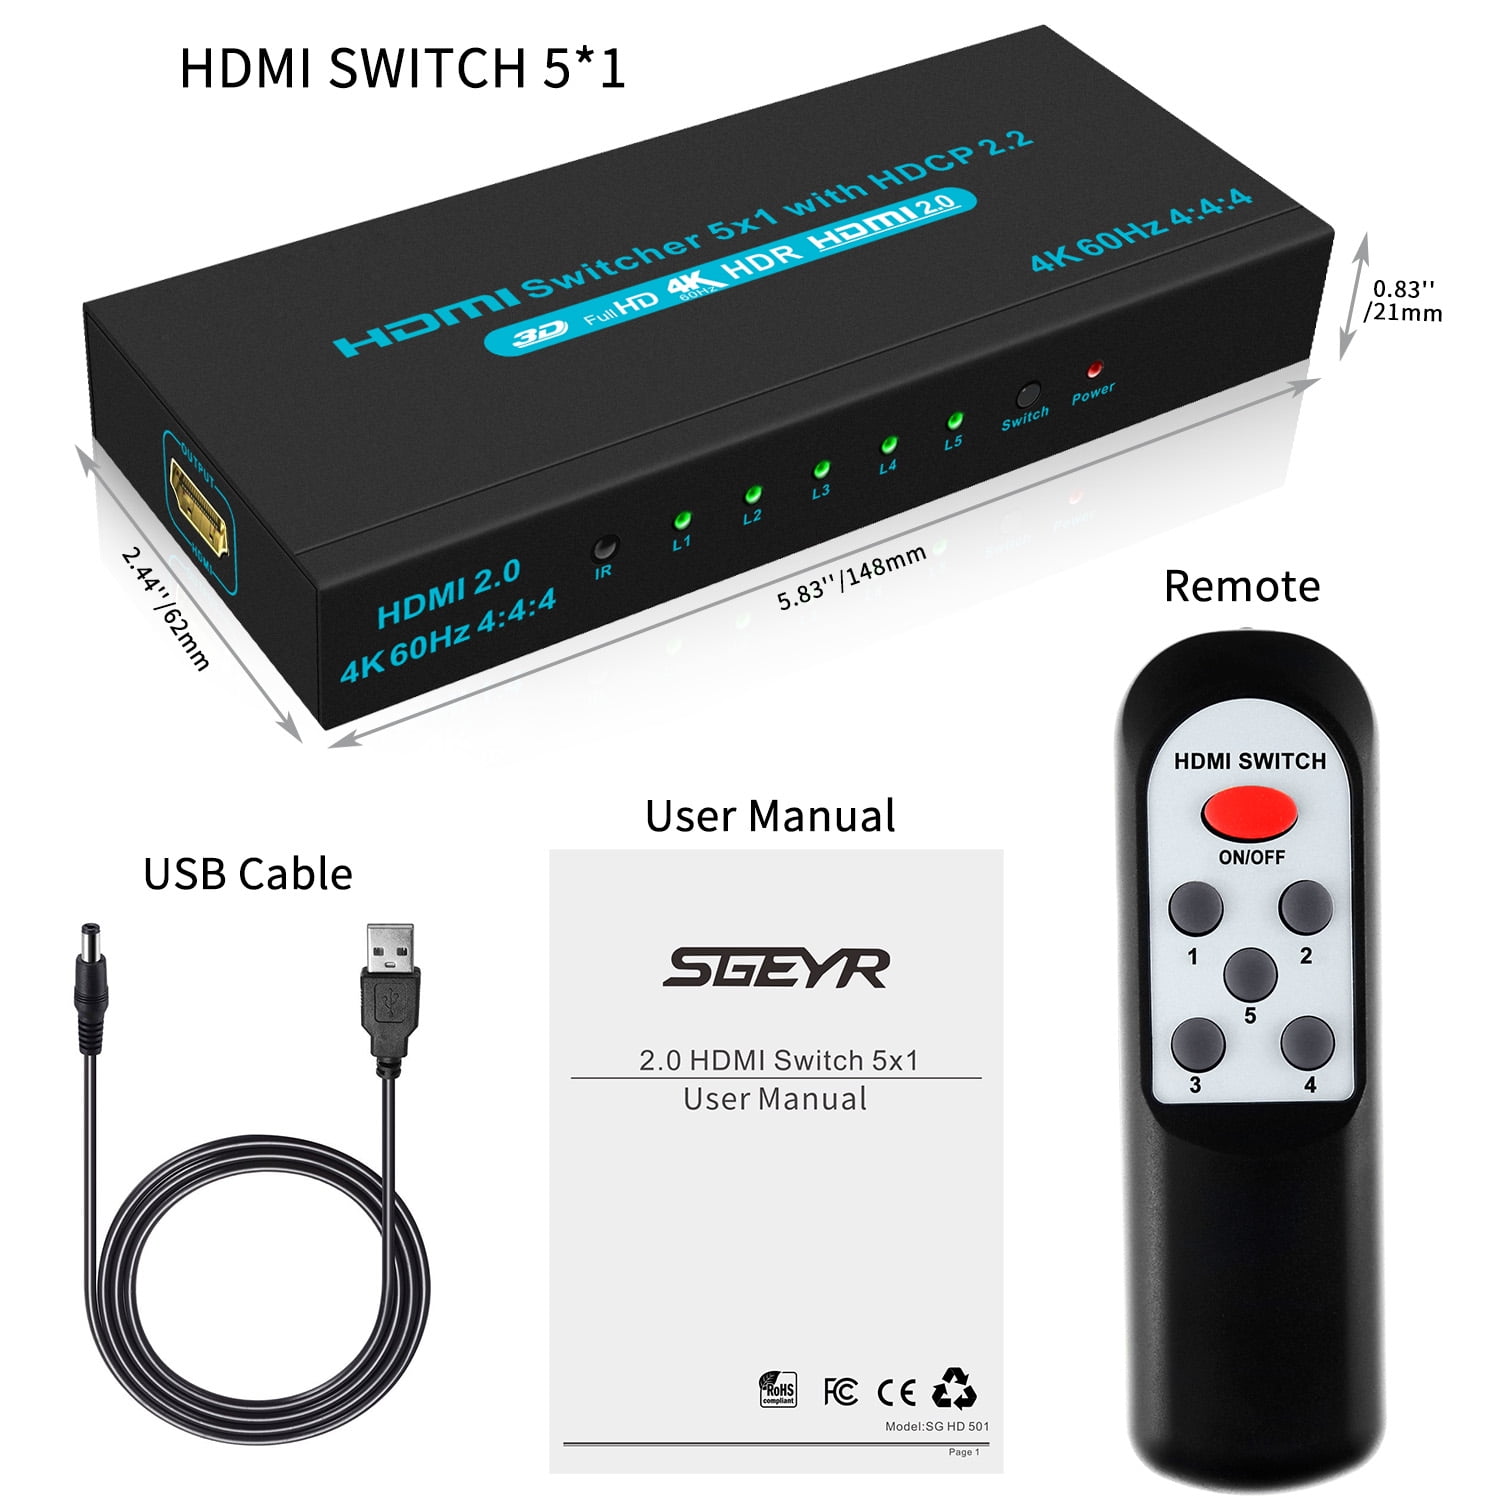 4K@60Hz HDMI 5x1 Switch with Remote,HDMI Switcher HDCP 2.2,Full HD/3D,1080P 